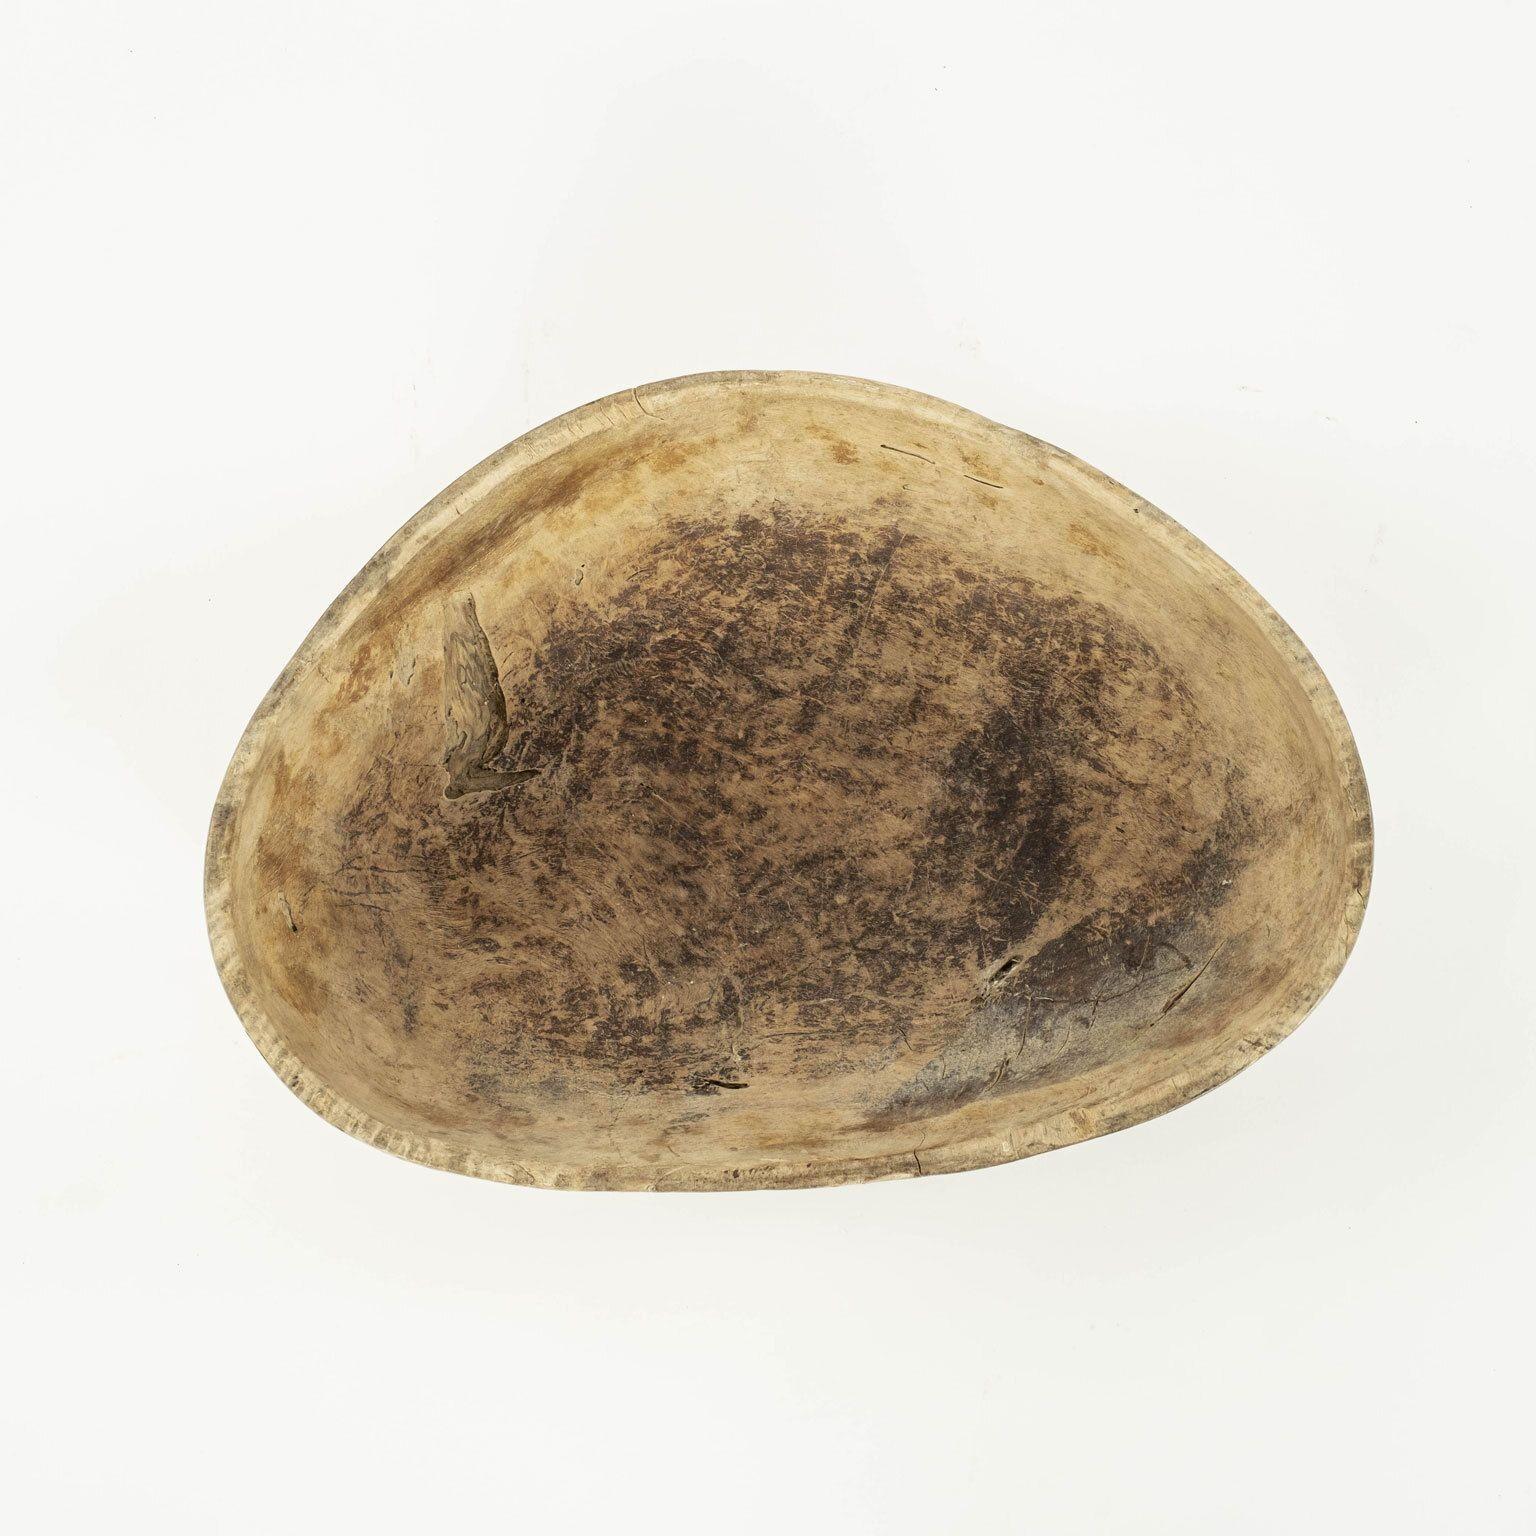 19th Century Swedish Naturally-Bleached Root Wood Bowl